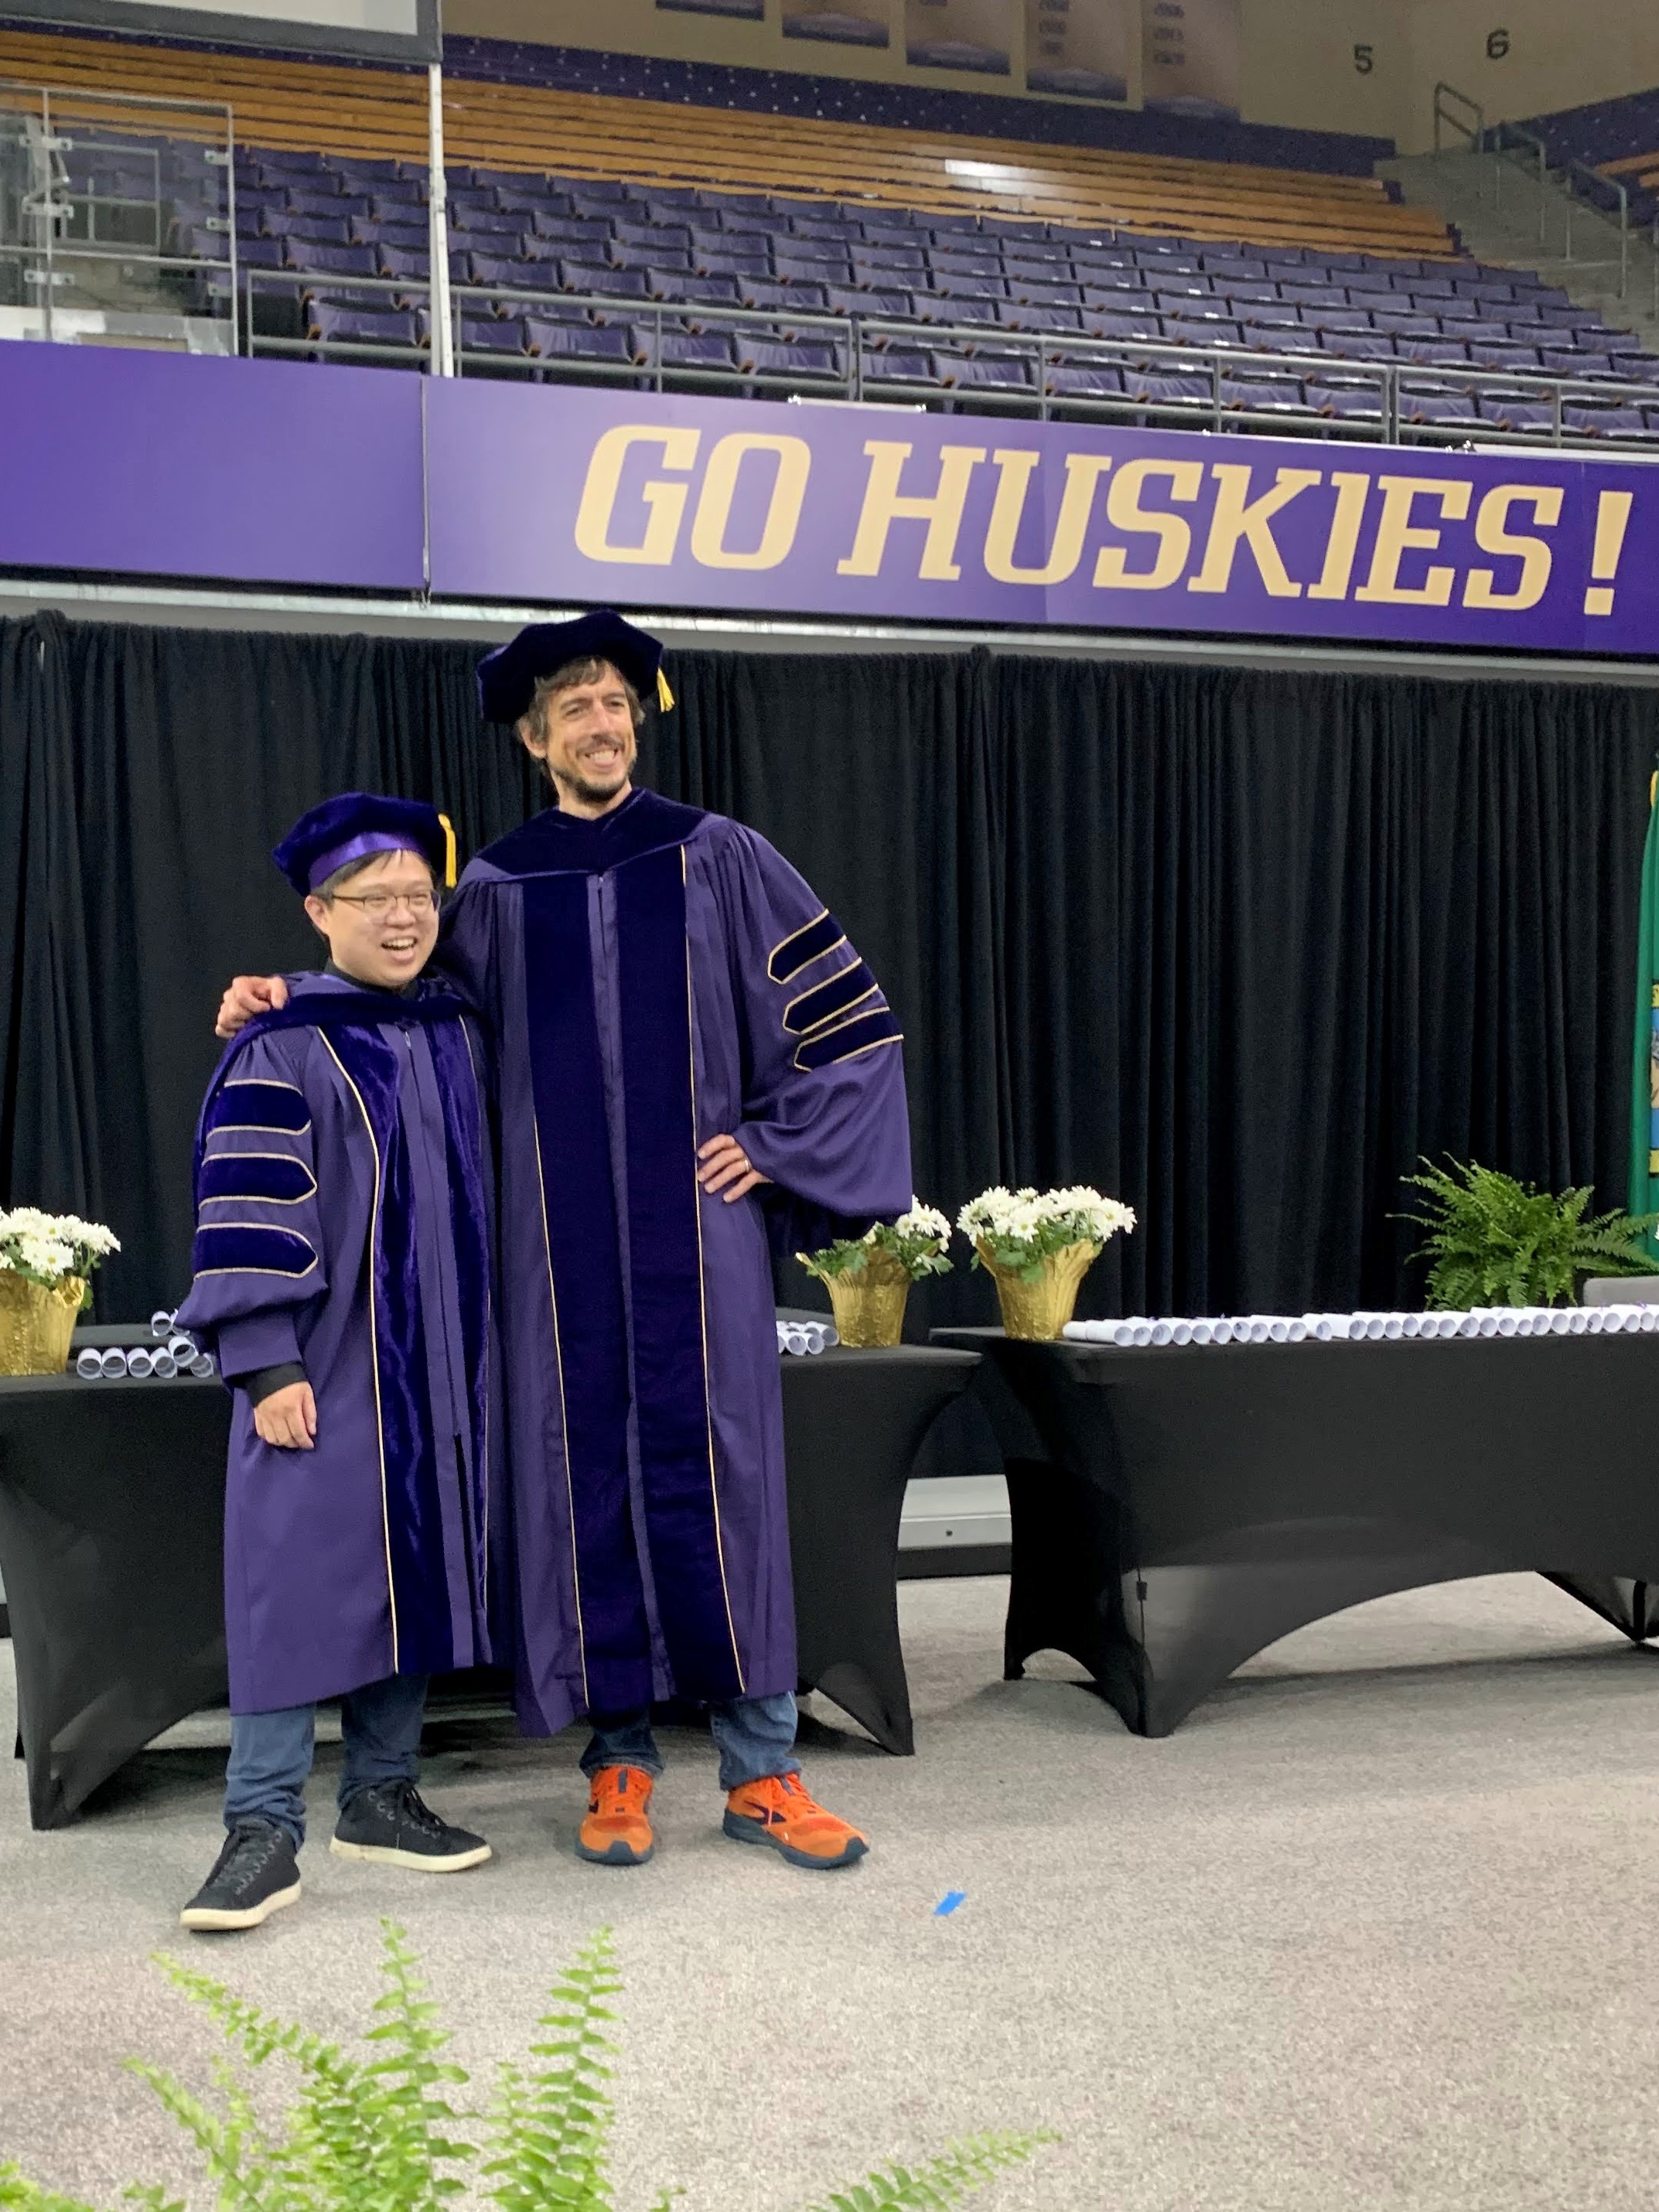 Jon and Liang standing together with a "Go Huskies" sign in the background